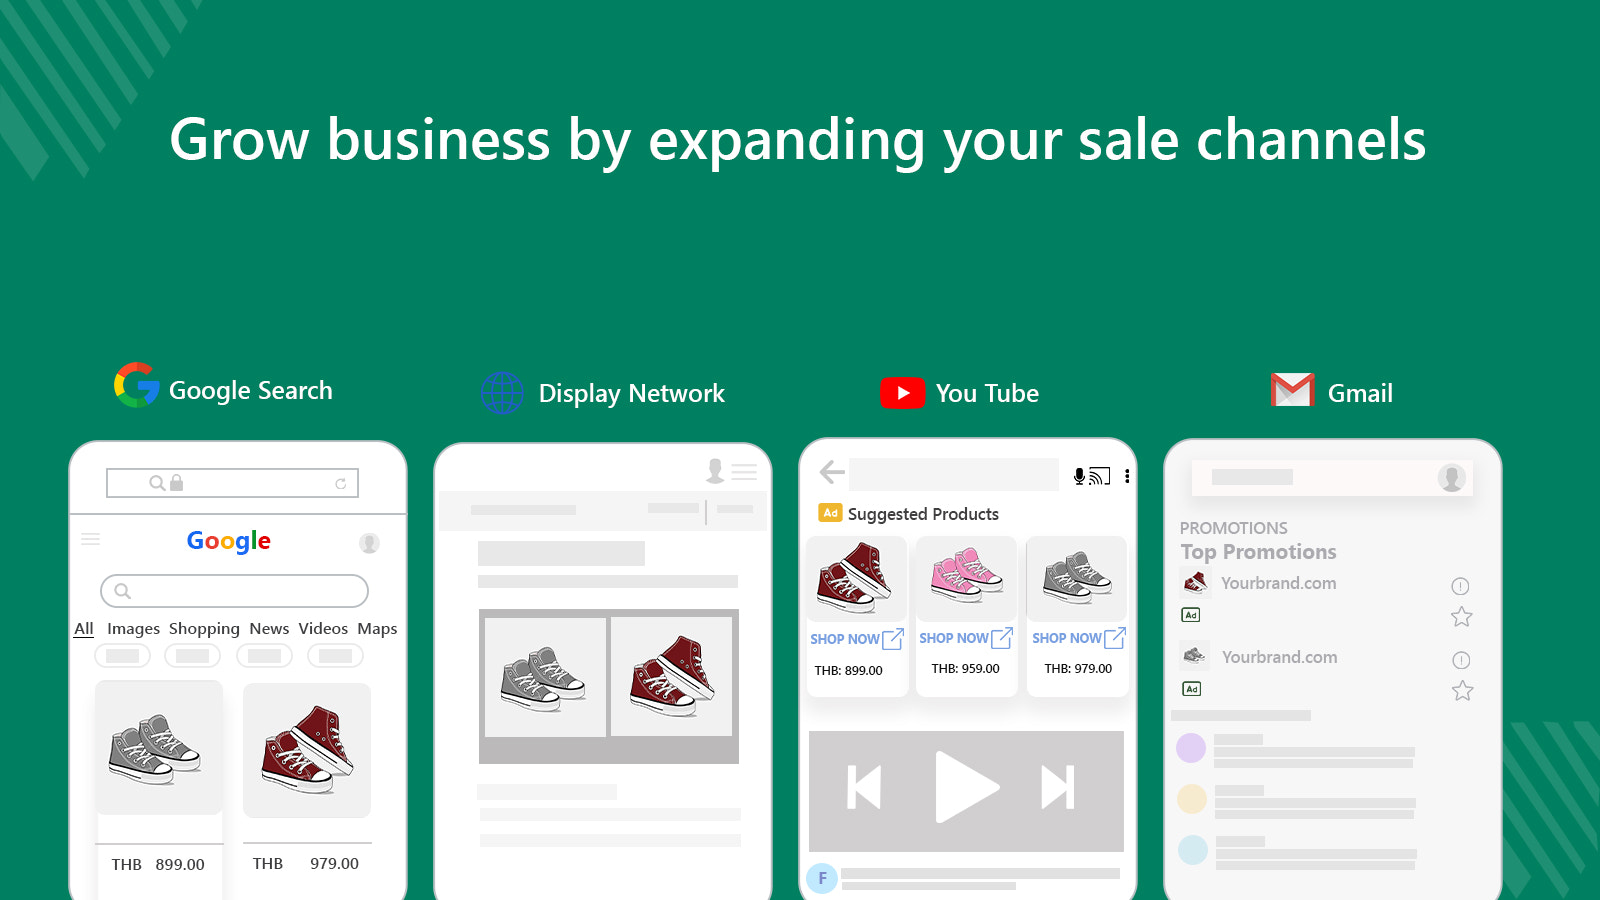 Create customizable product feeds for multiple markets. Localize